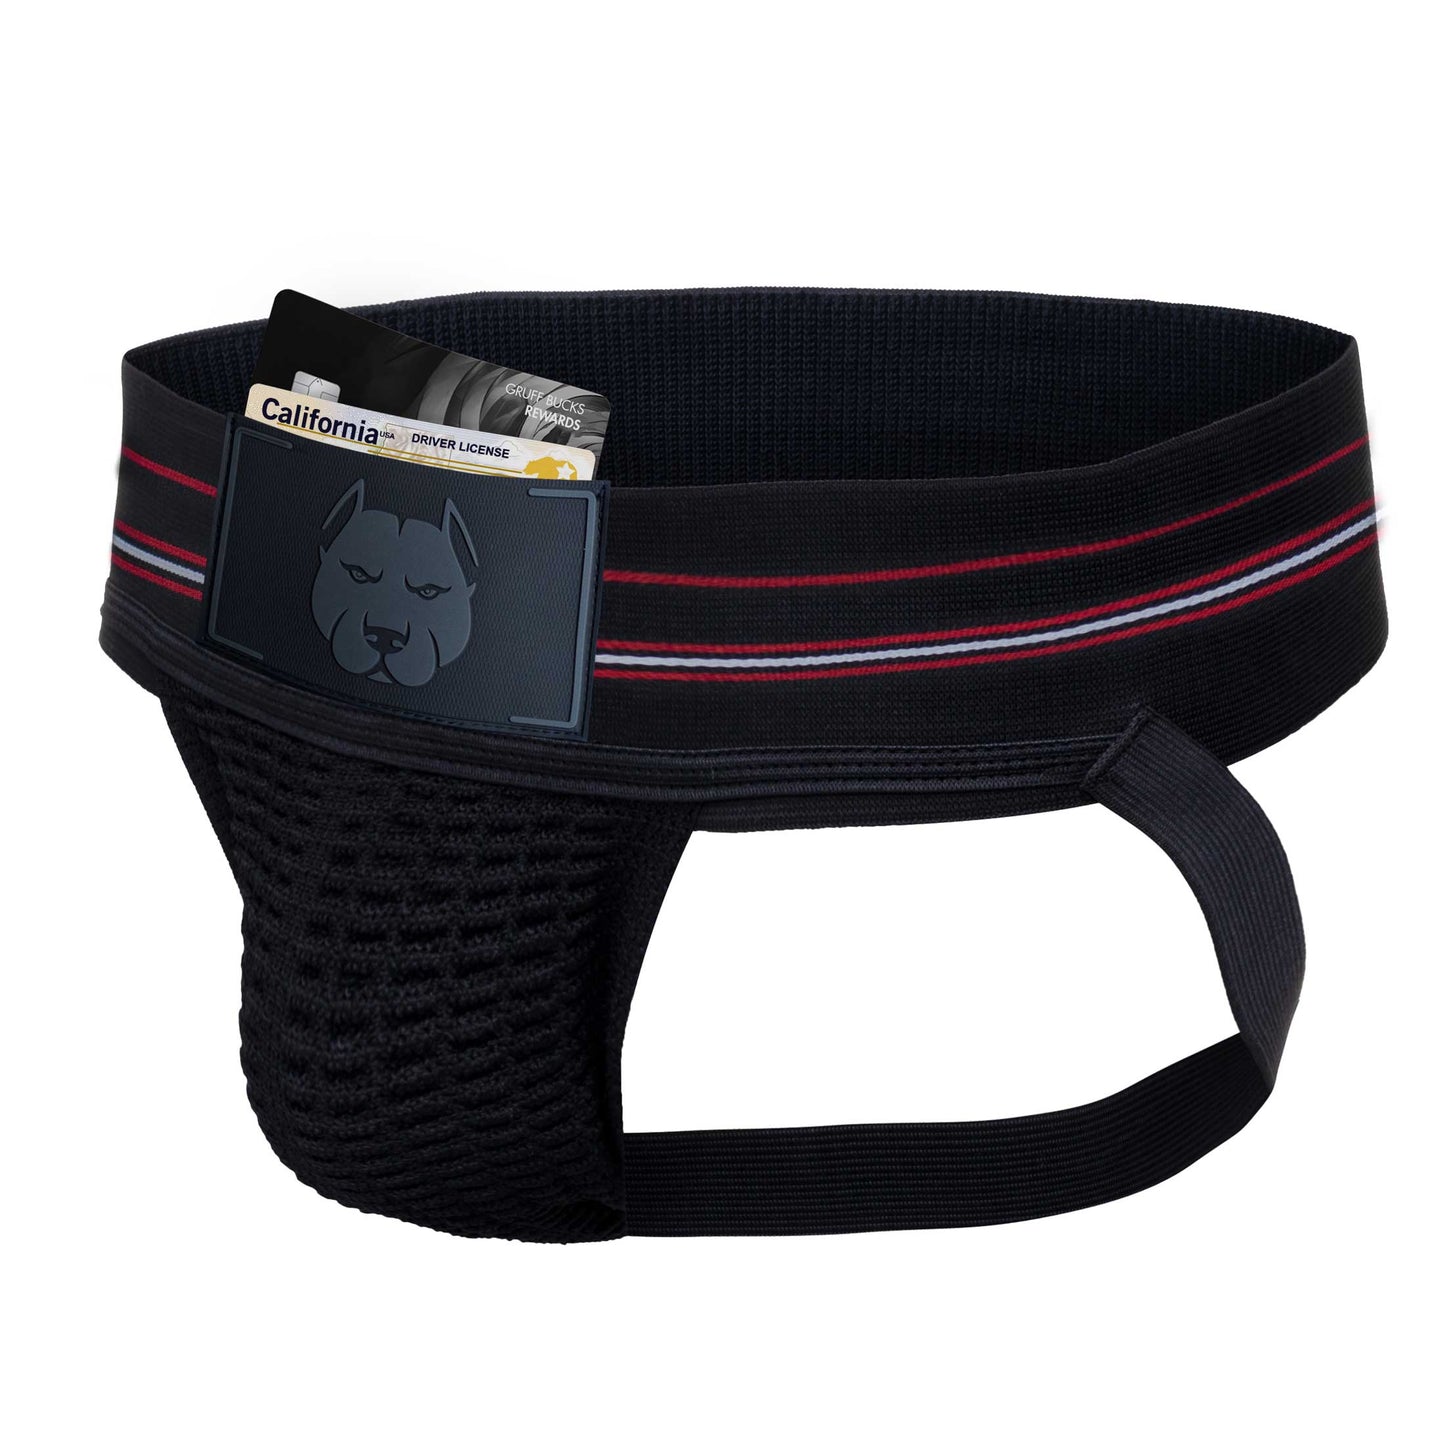 The Gruff Pup Pocket Jockstrap with an ID and credit card sticking out of the front pocket.